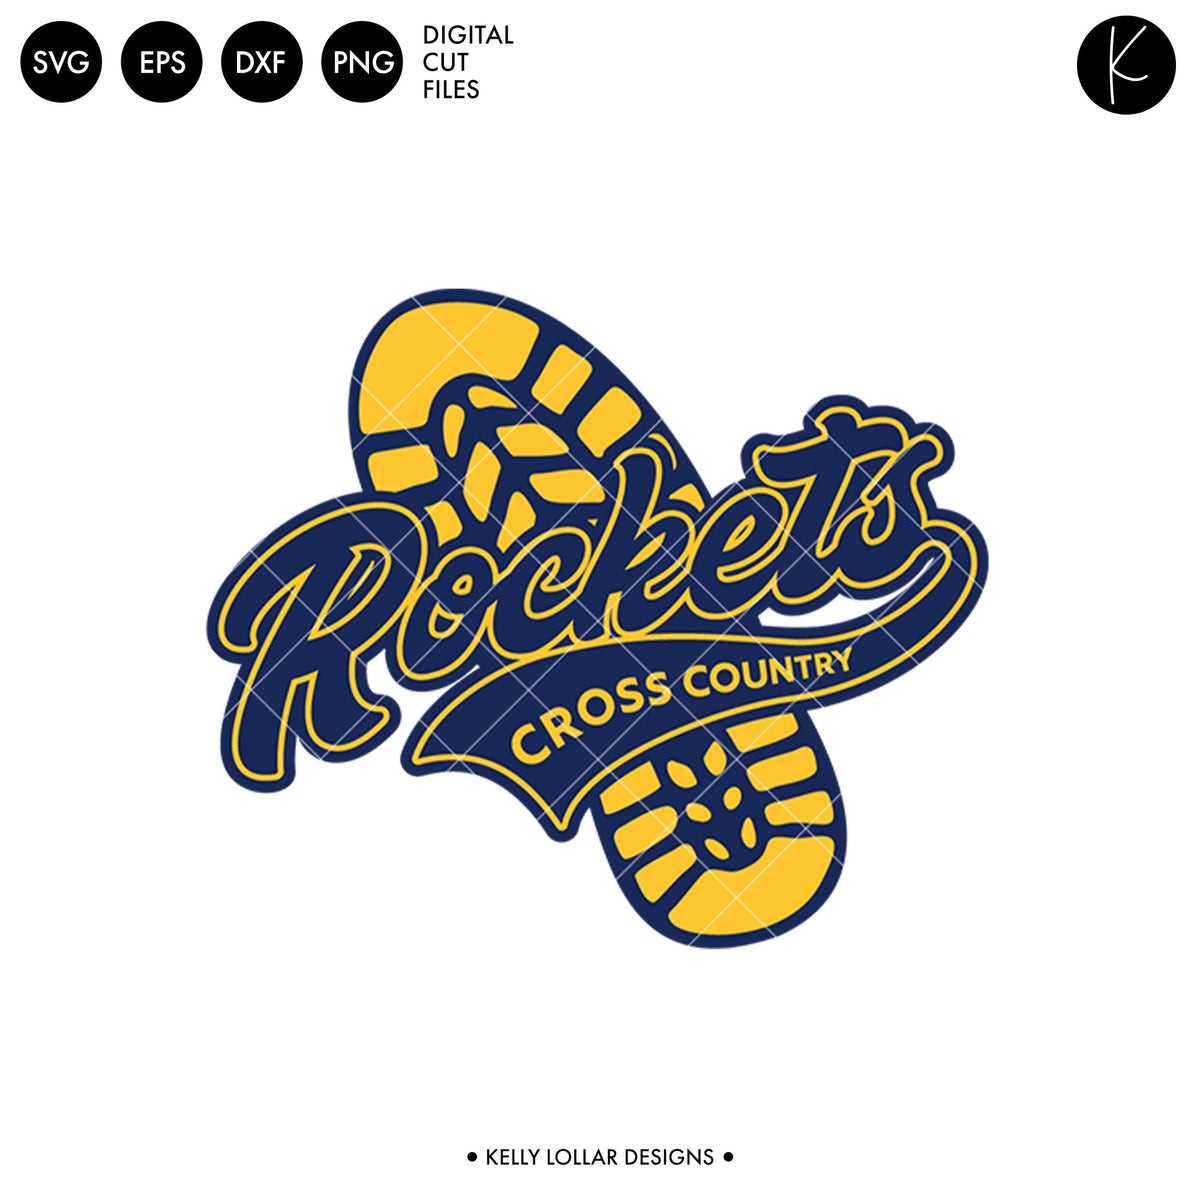 Rockets Cross Country Bundle | SVG DXF EPS PNG Cut Files